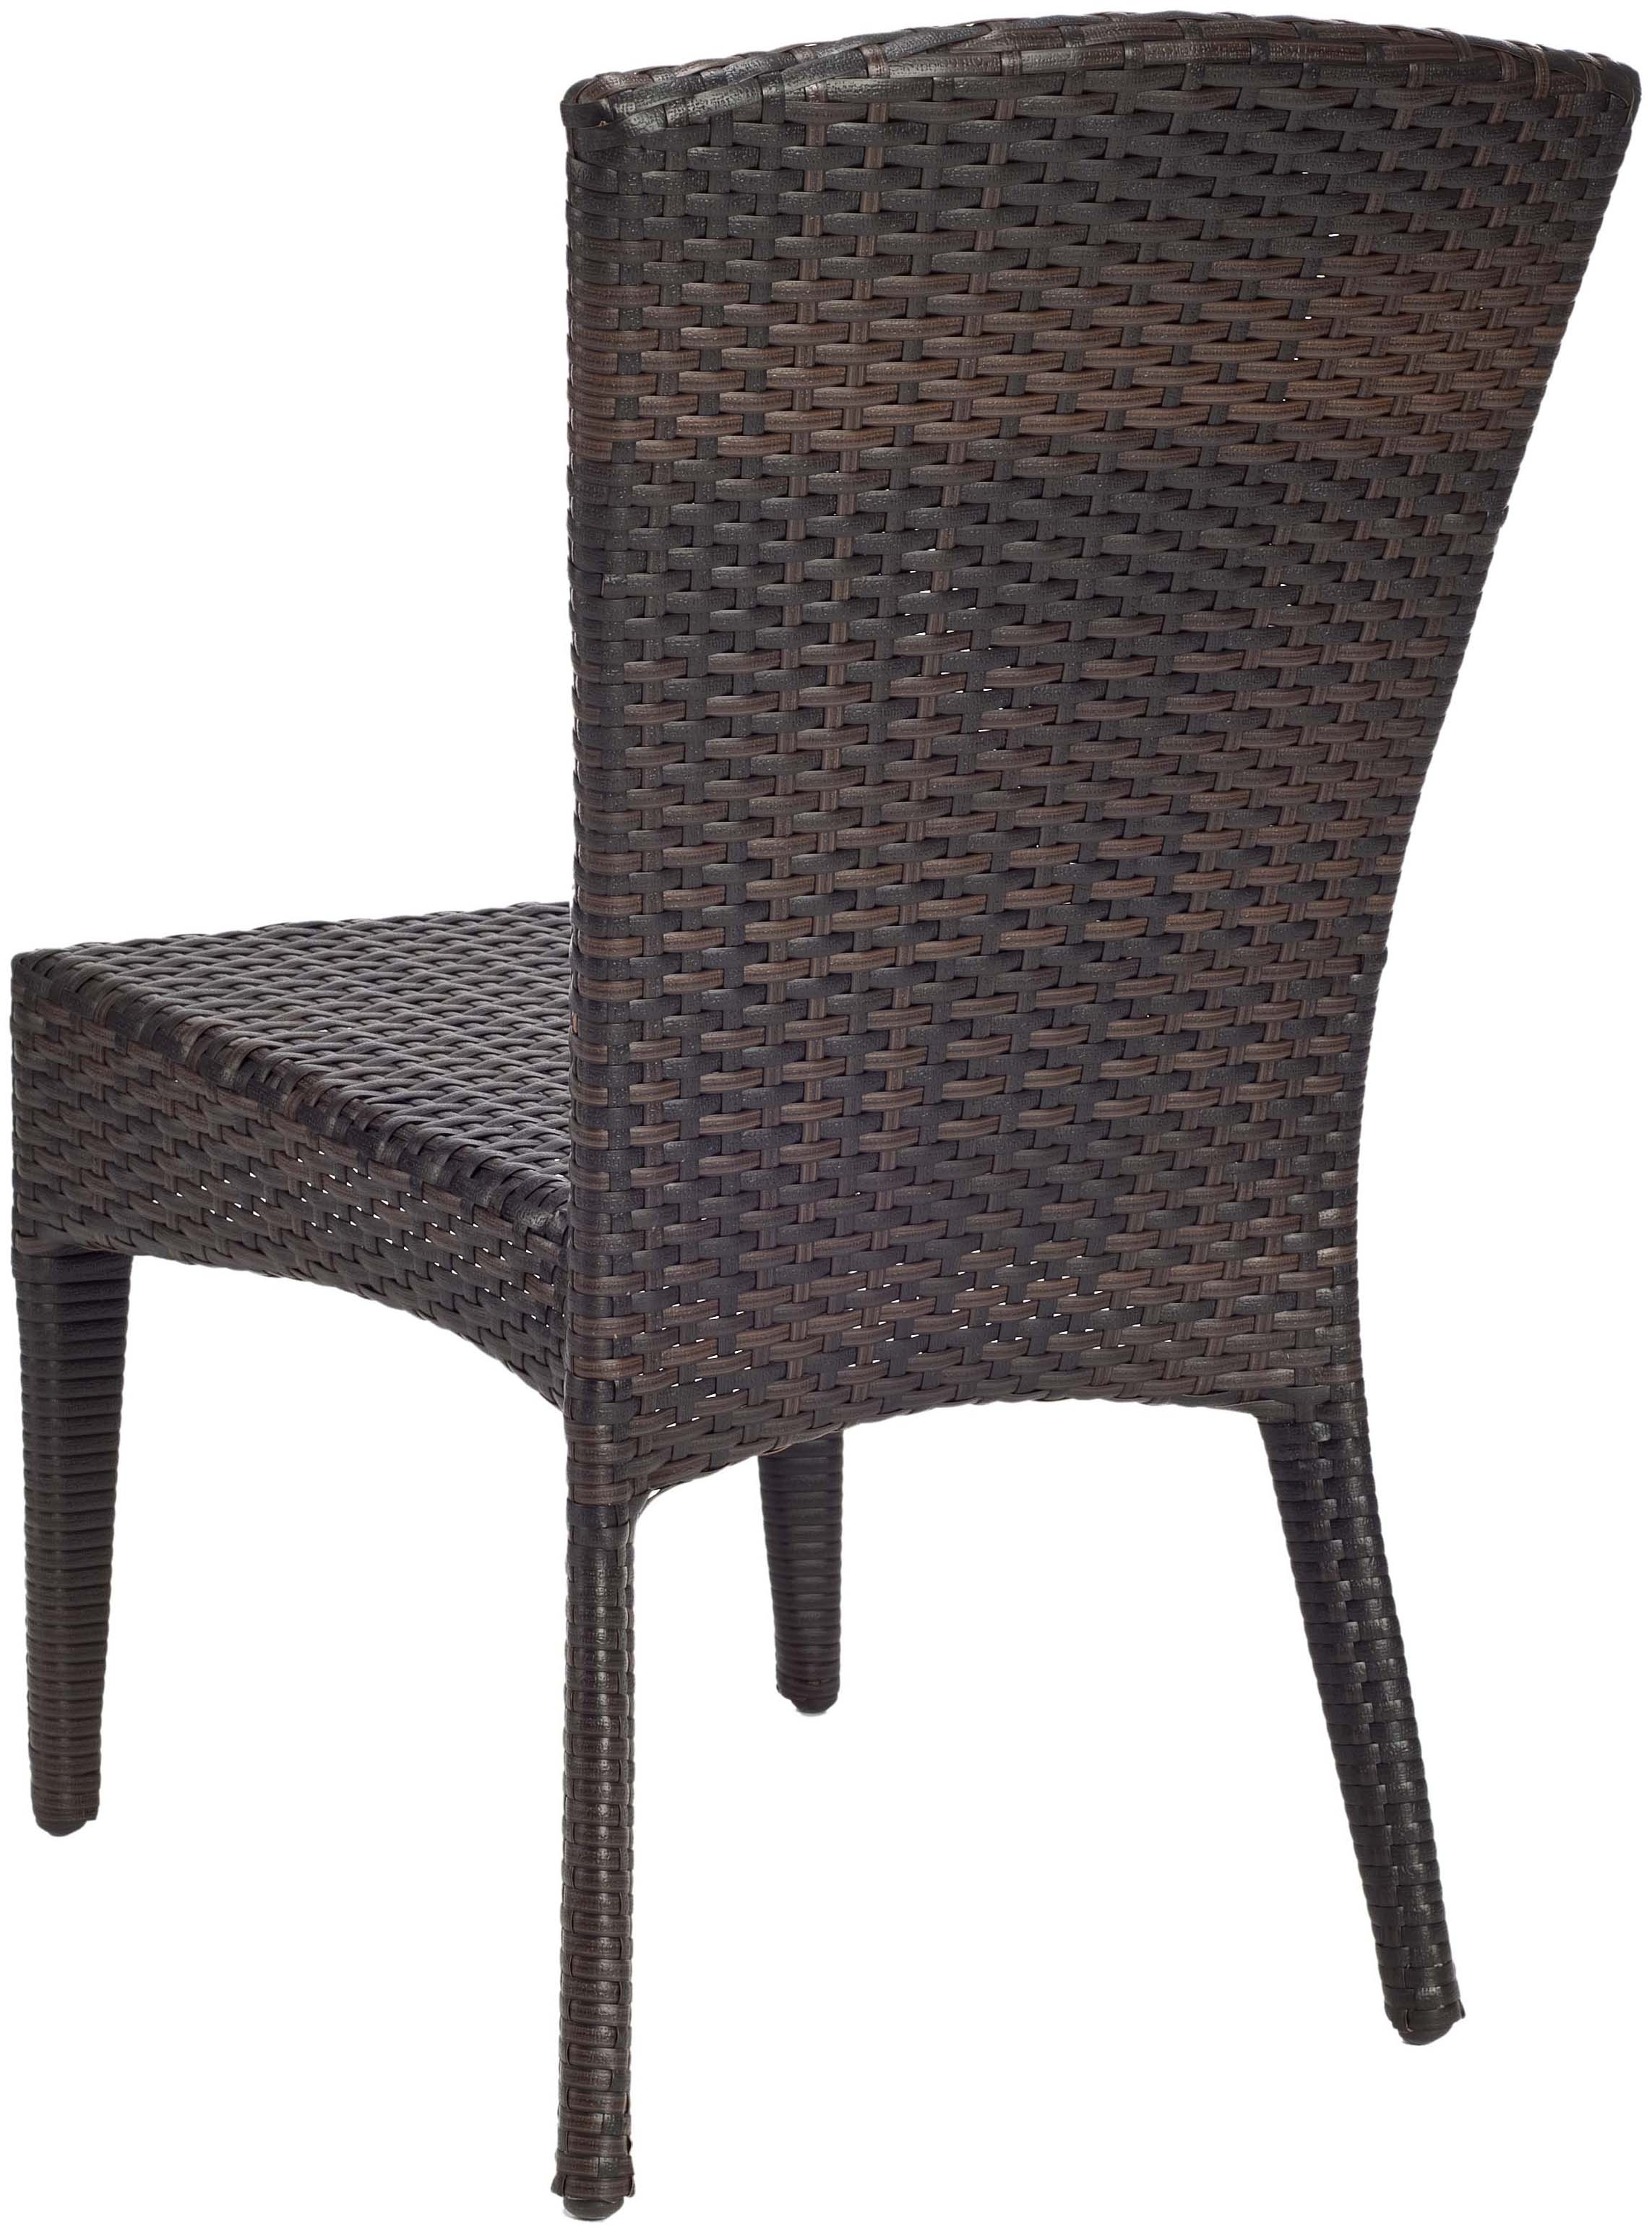 New Castle Wicker Side Chair - Black/Brown - Arlo Home - Image 3